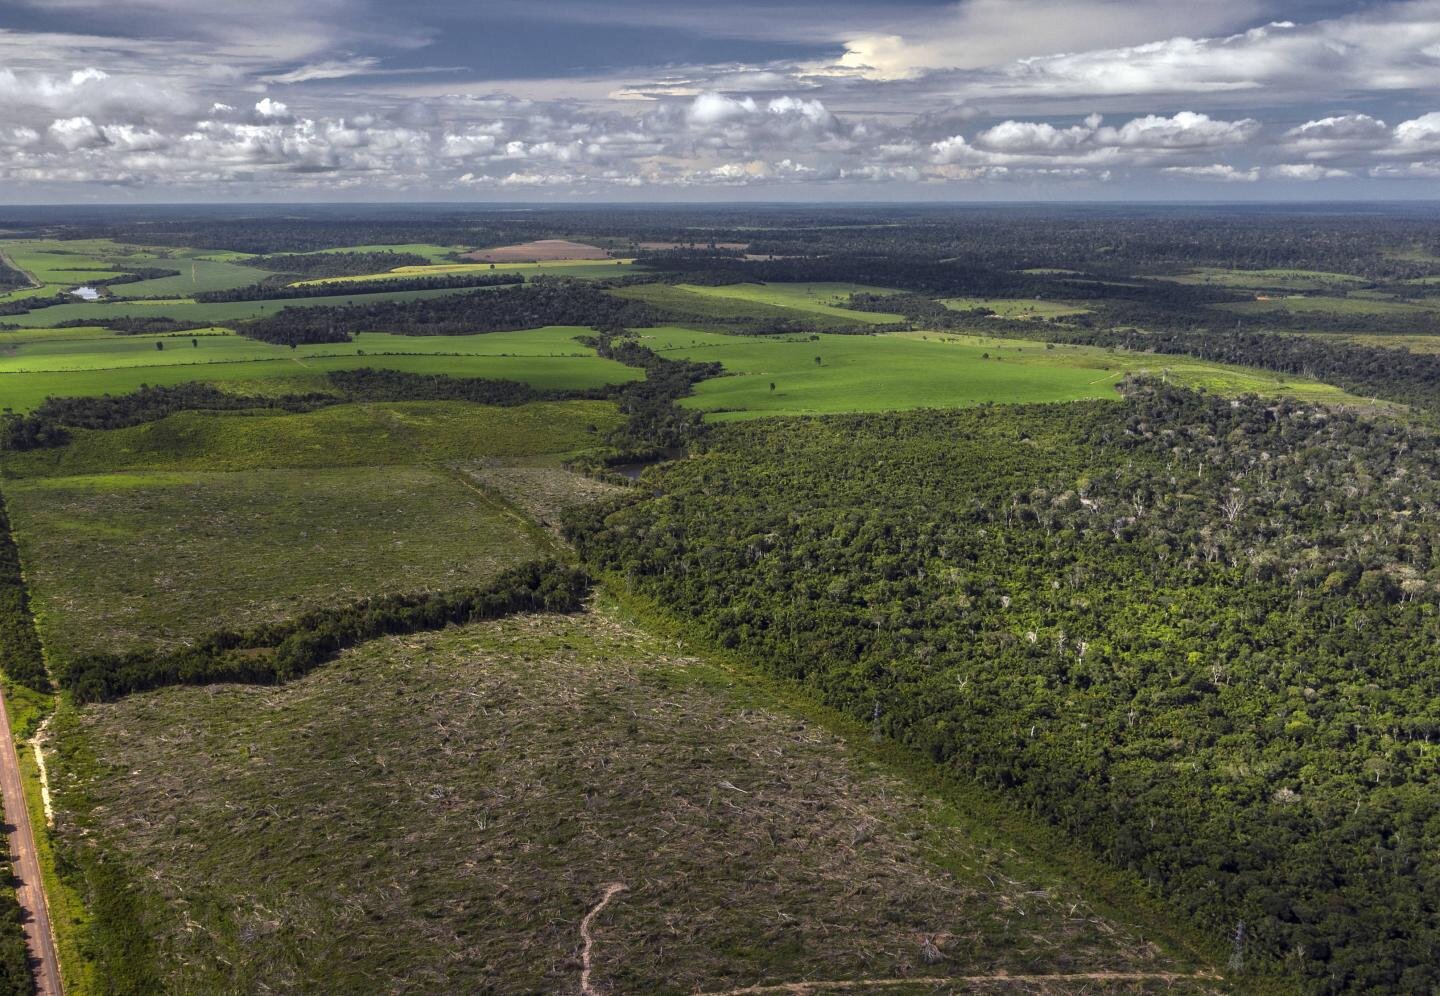 Amazon Forest Regrowth Much Slower Than Previously Thought